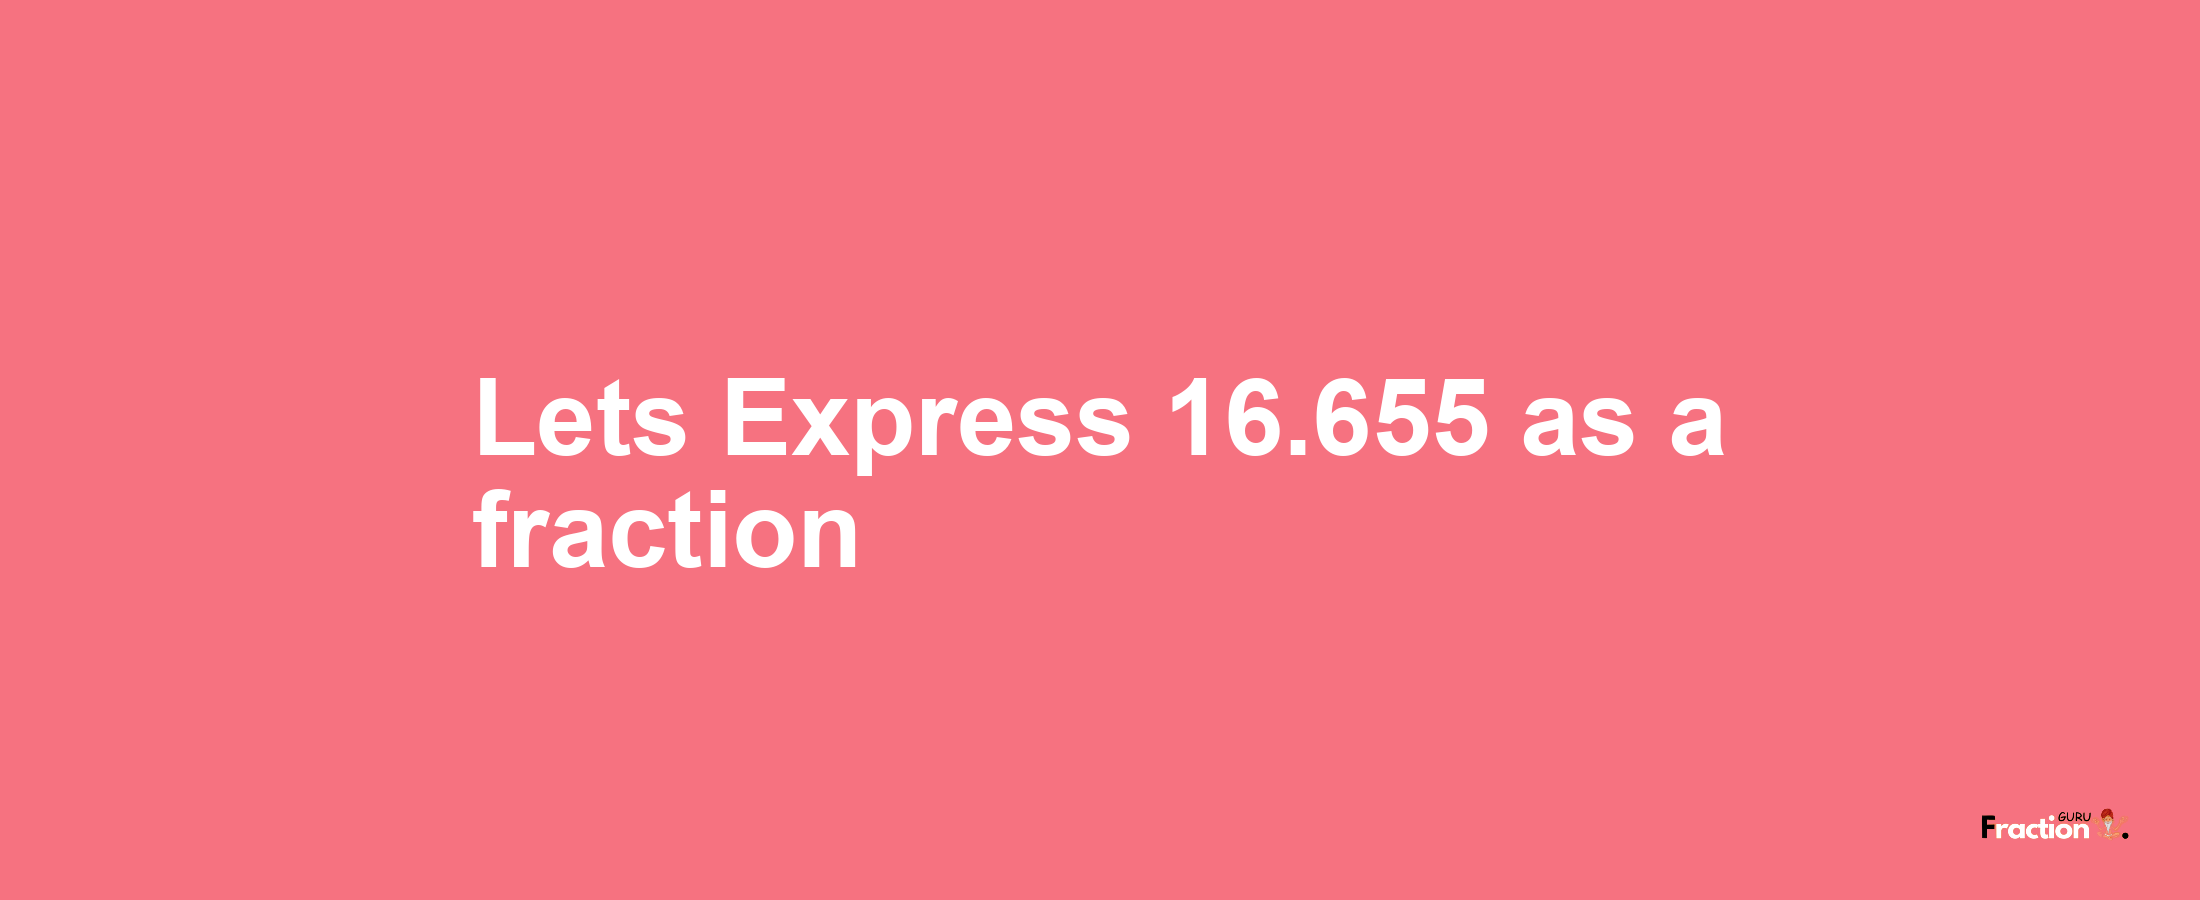 Lets Express 16.655 as afraction